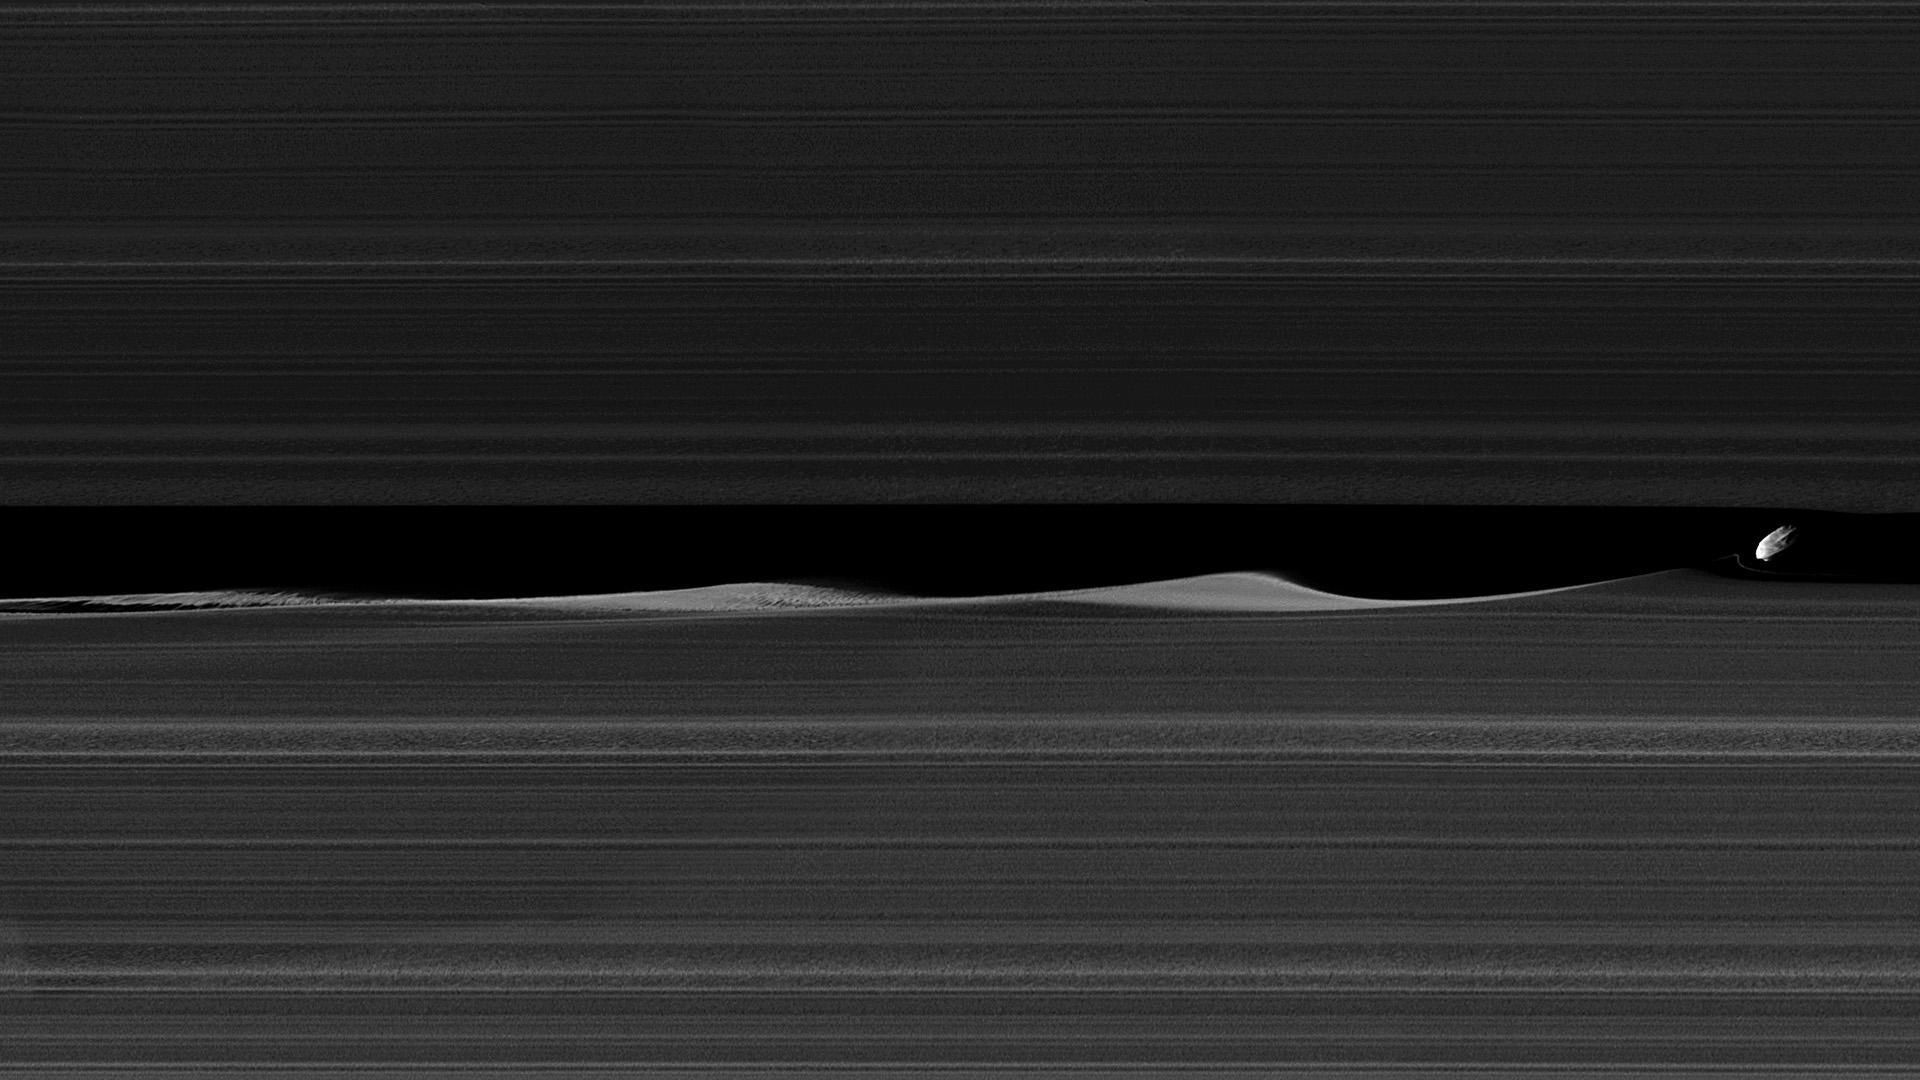 Saturn's rings as viewed by the Cassini spacecraft.